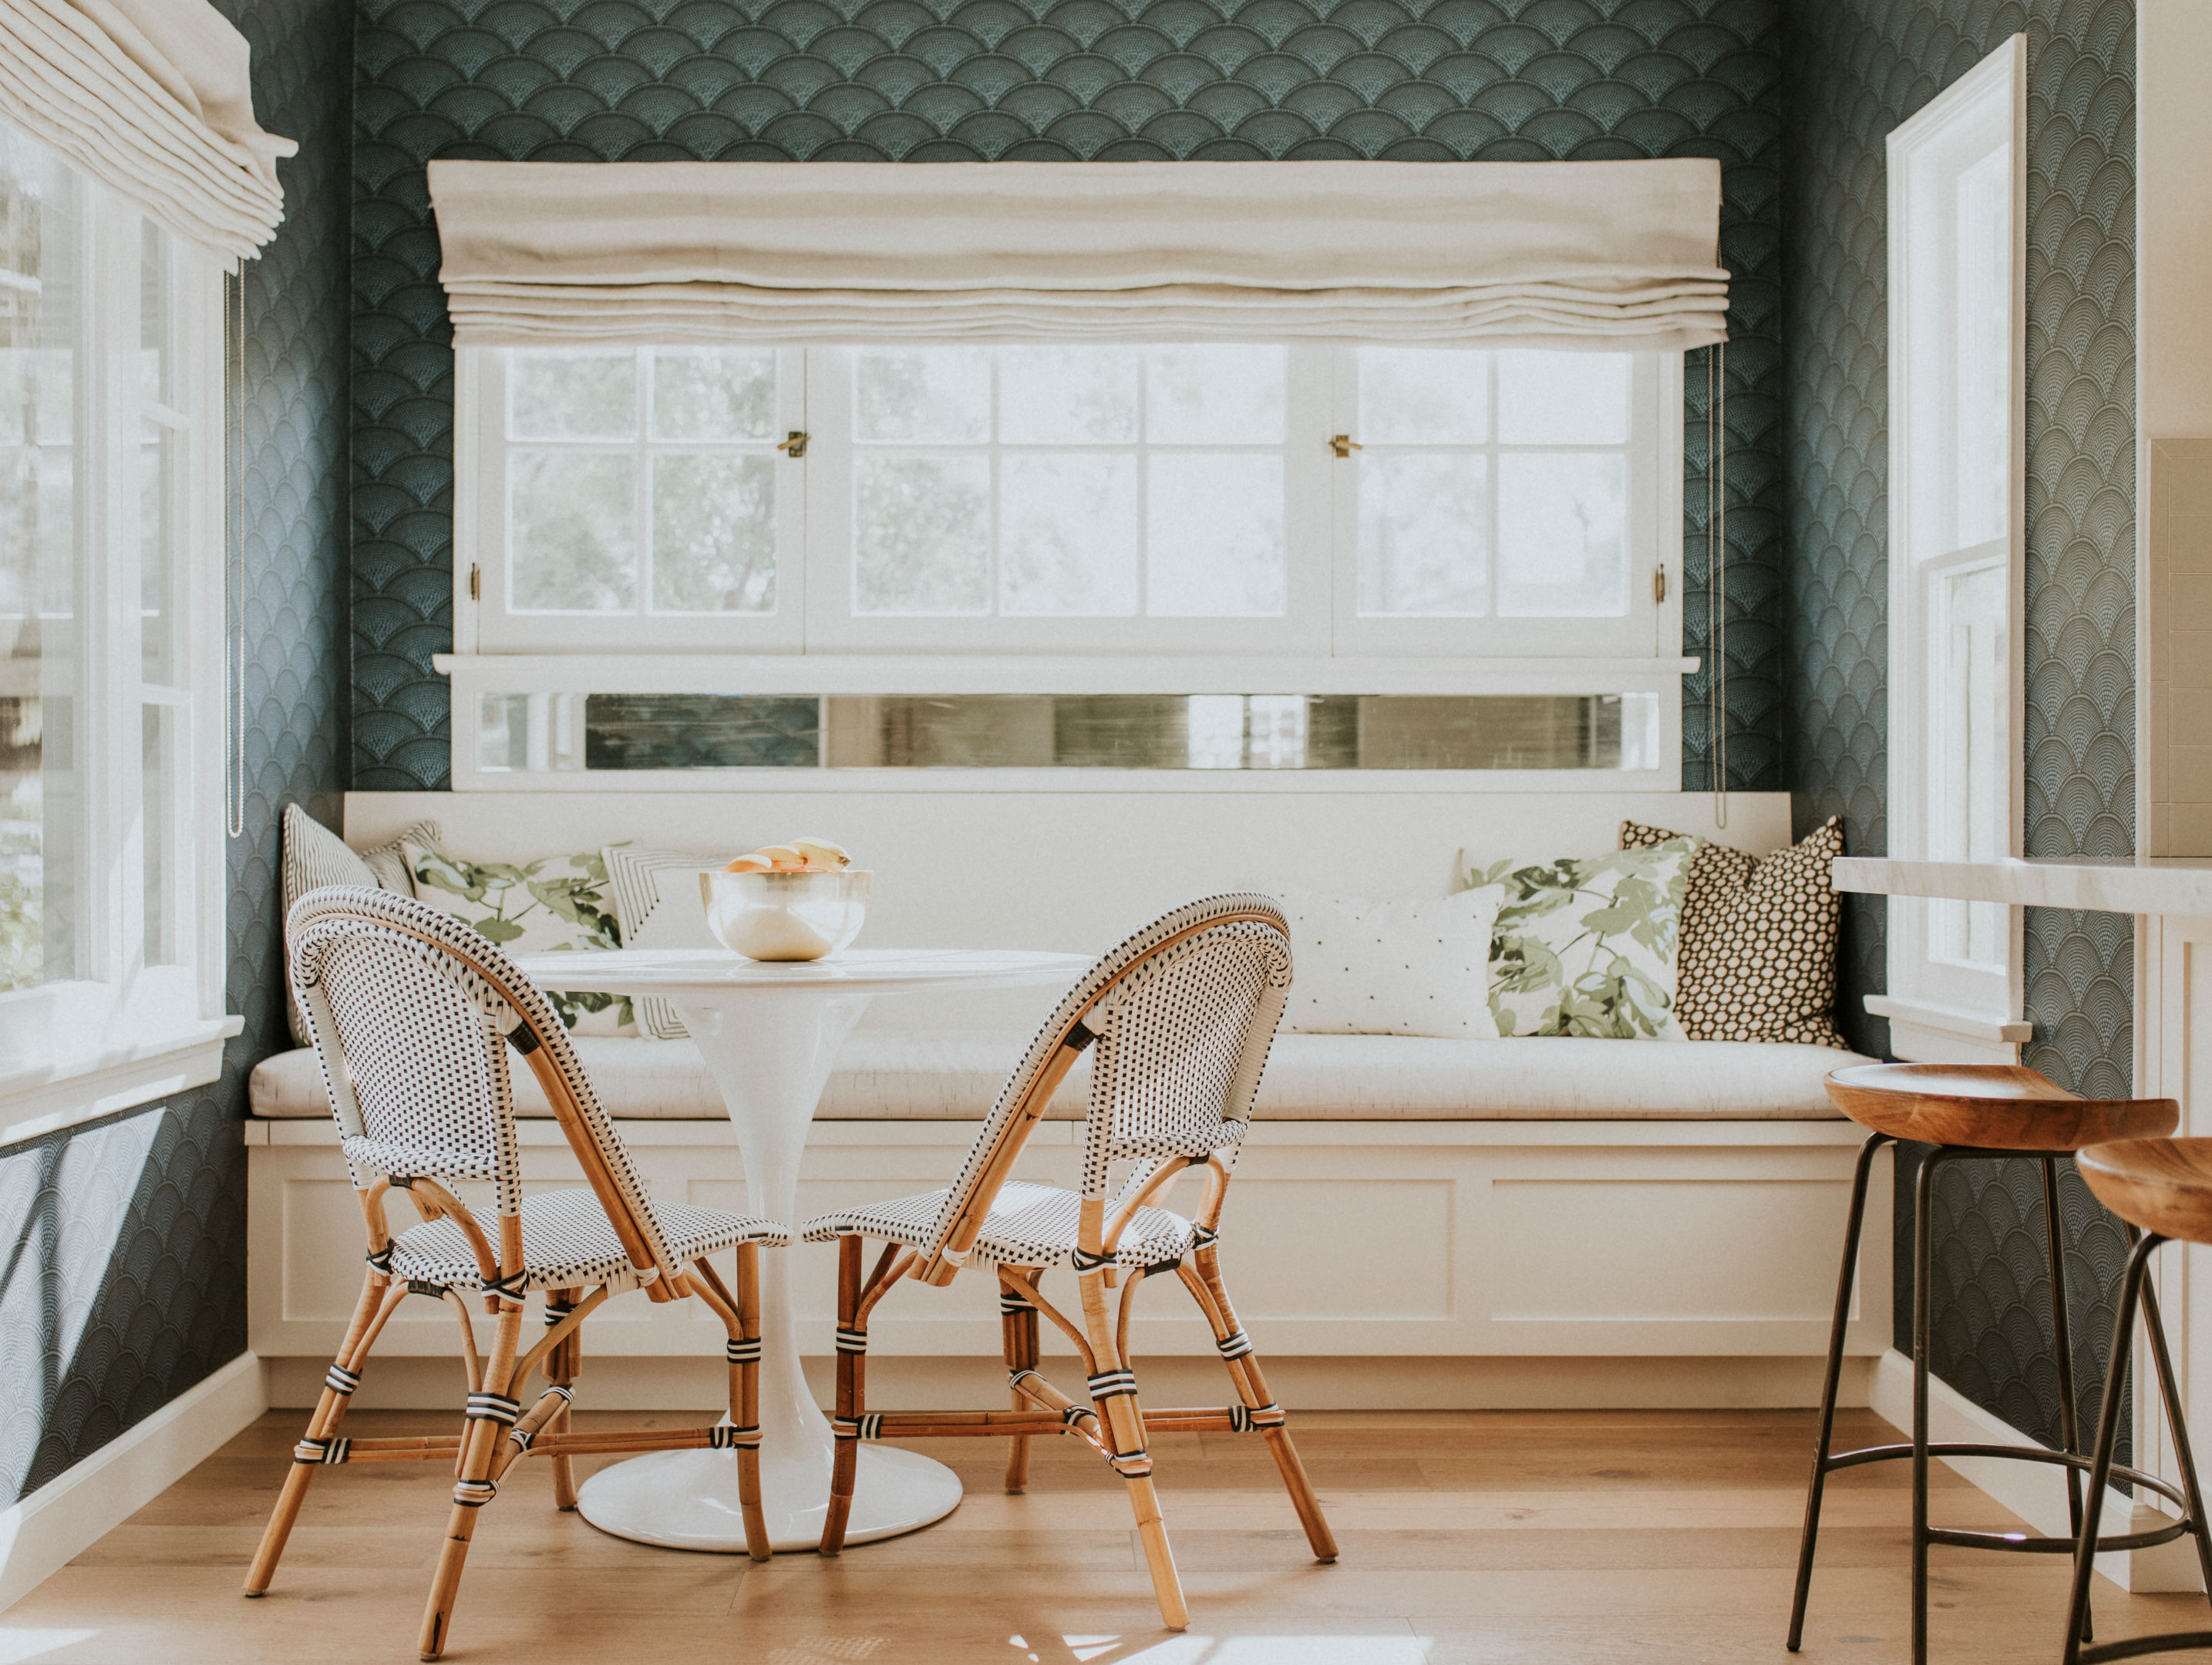 Upgrade the dining room with photo wallpaper! By Rawpixel (https://elements.envato.com/home-dining-room-ZN97HSC)